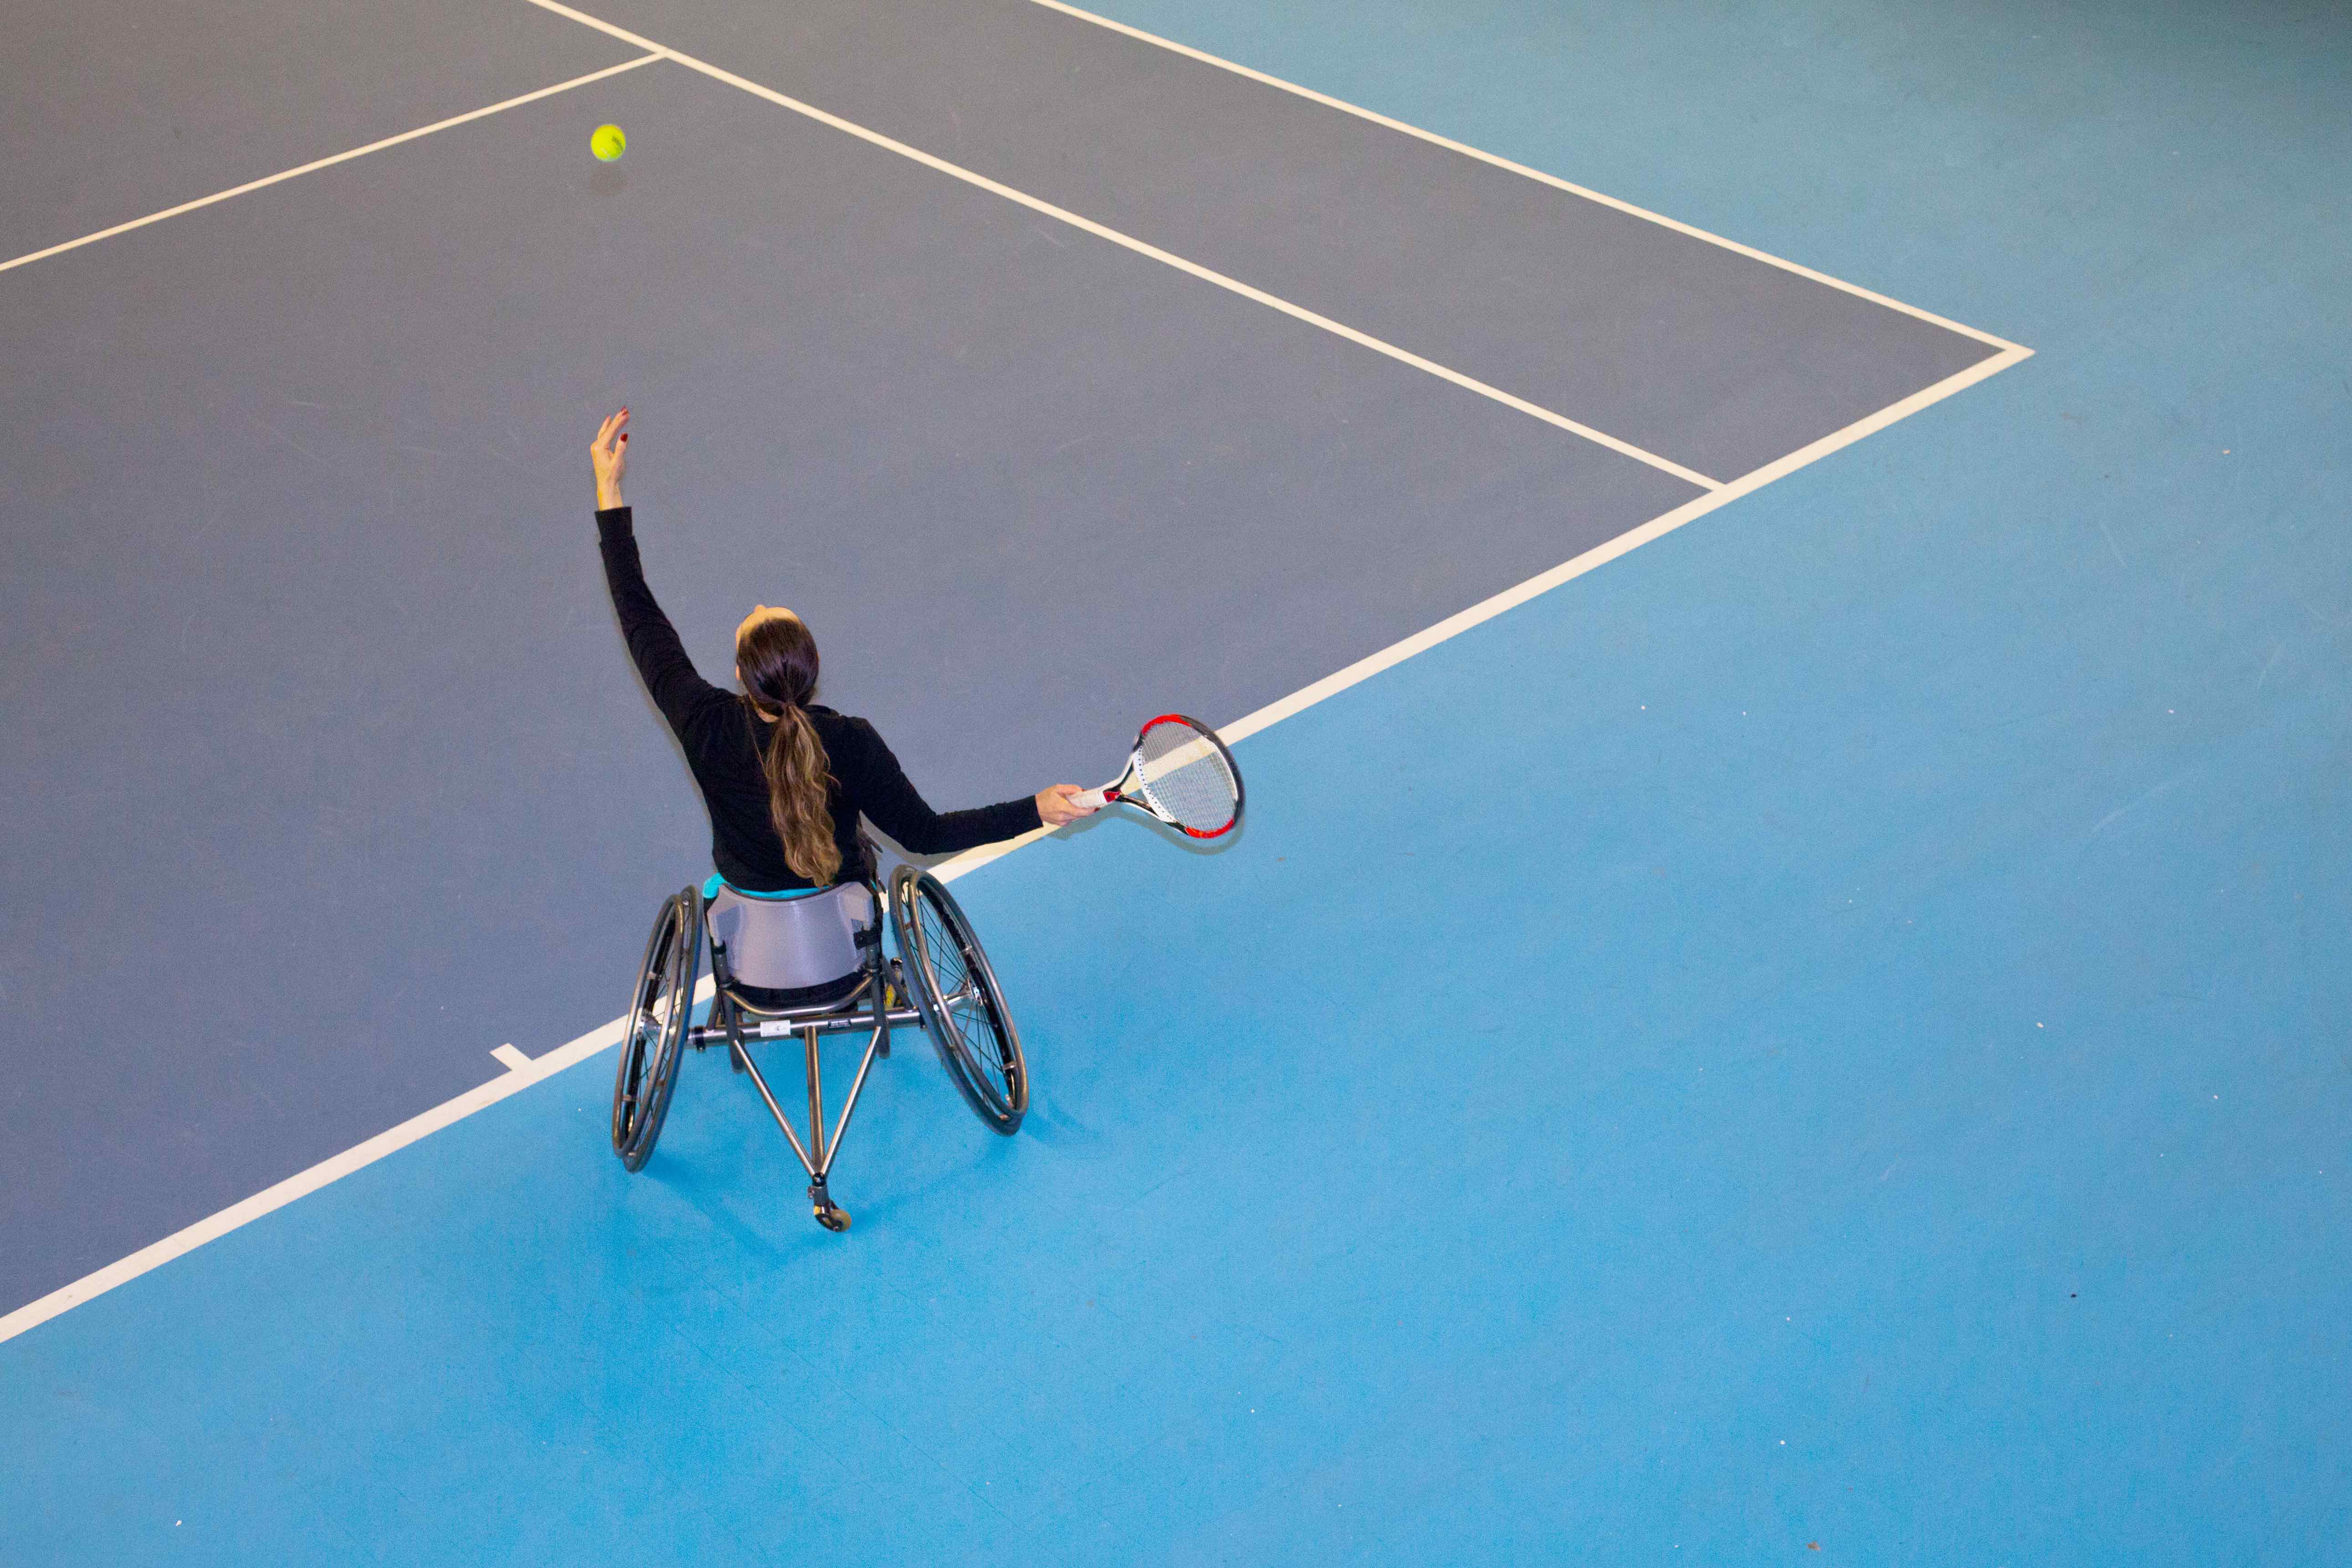 A woman in a wheelchair in the middle of a tennis serve, the kind of photos Getty is hoping to spur with its disability photography grant